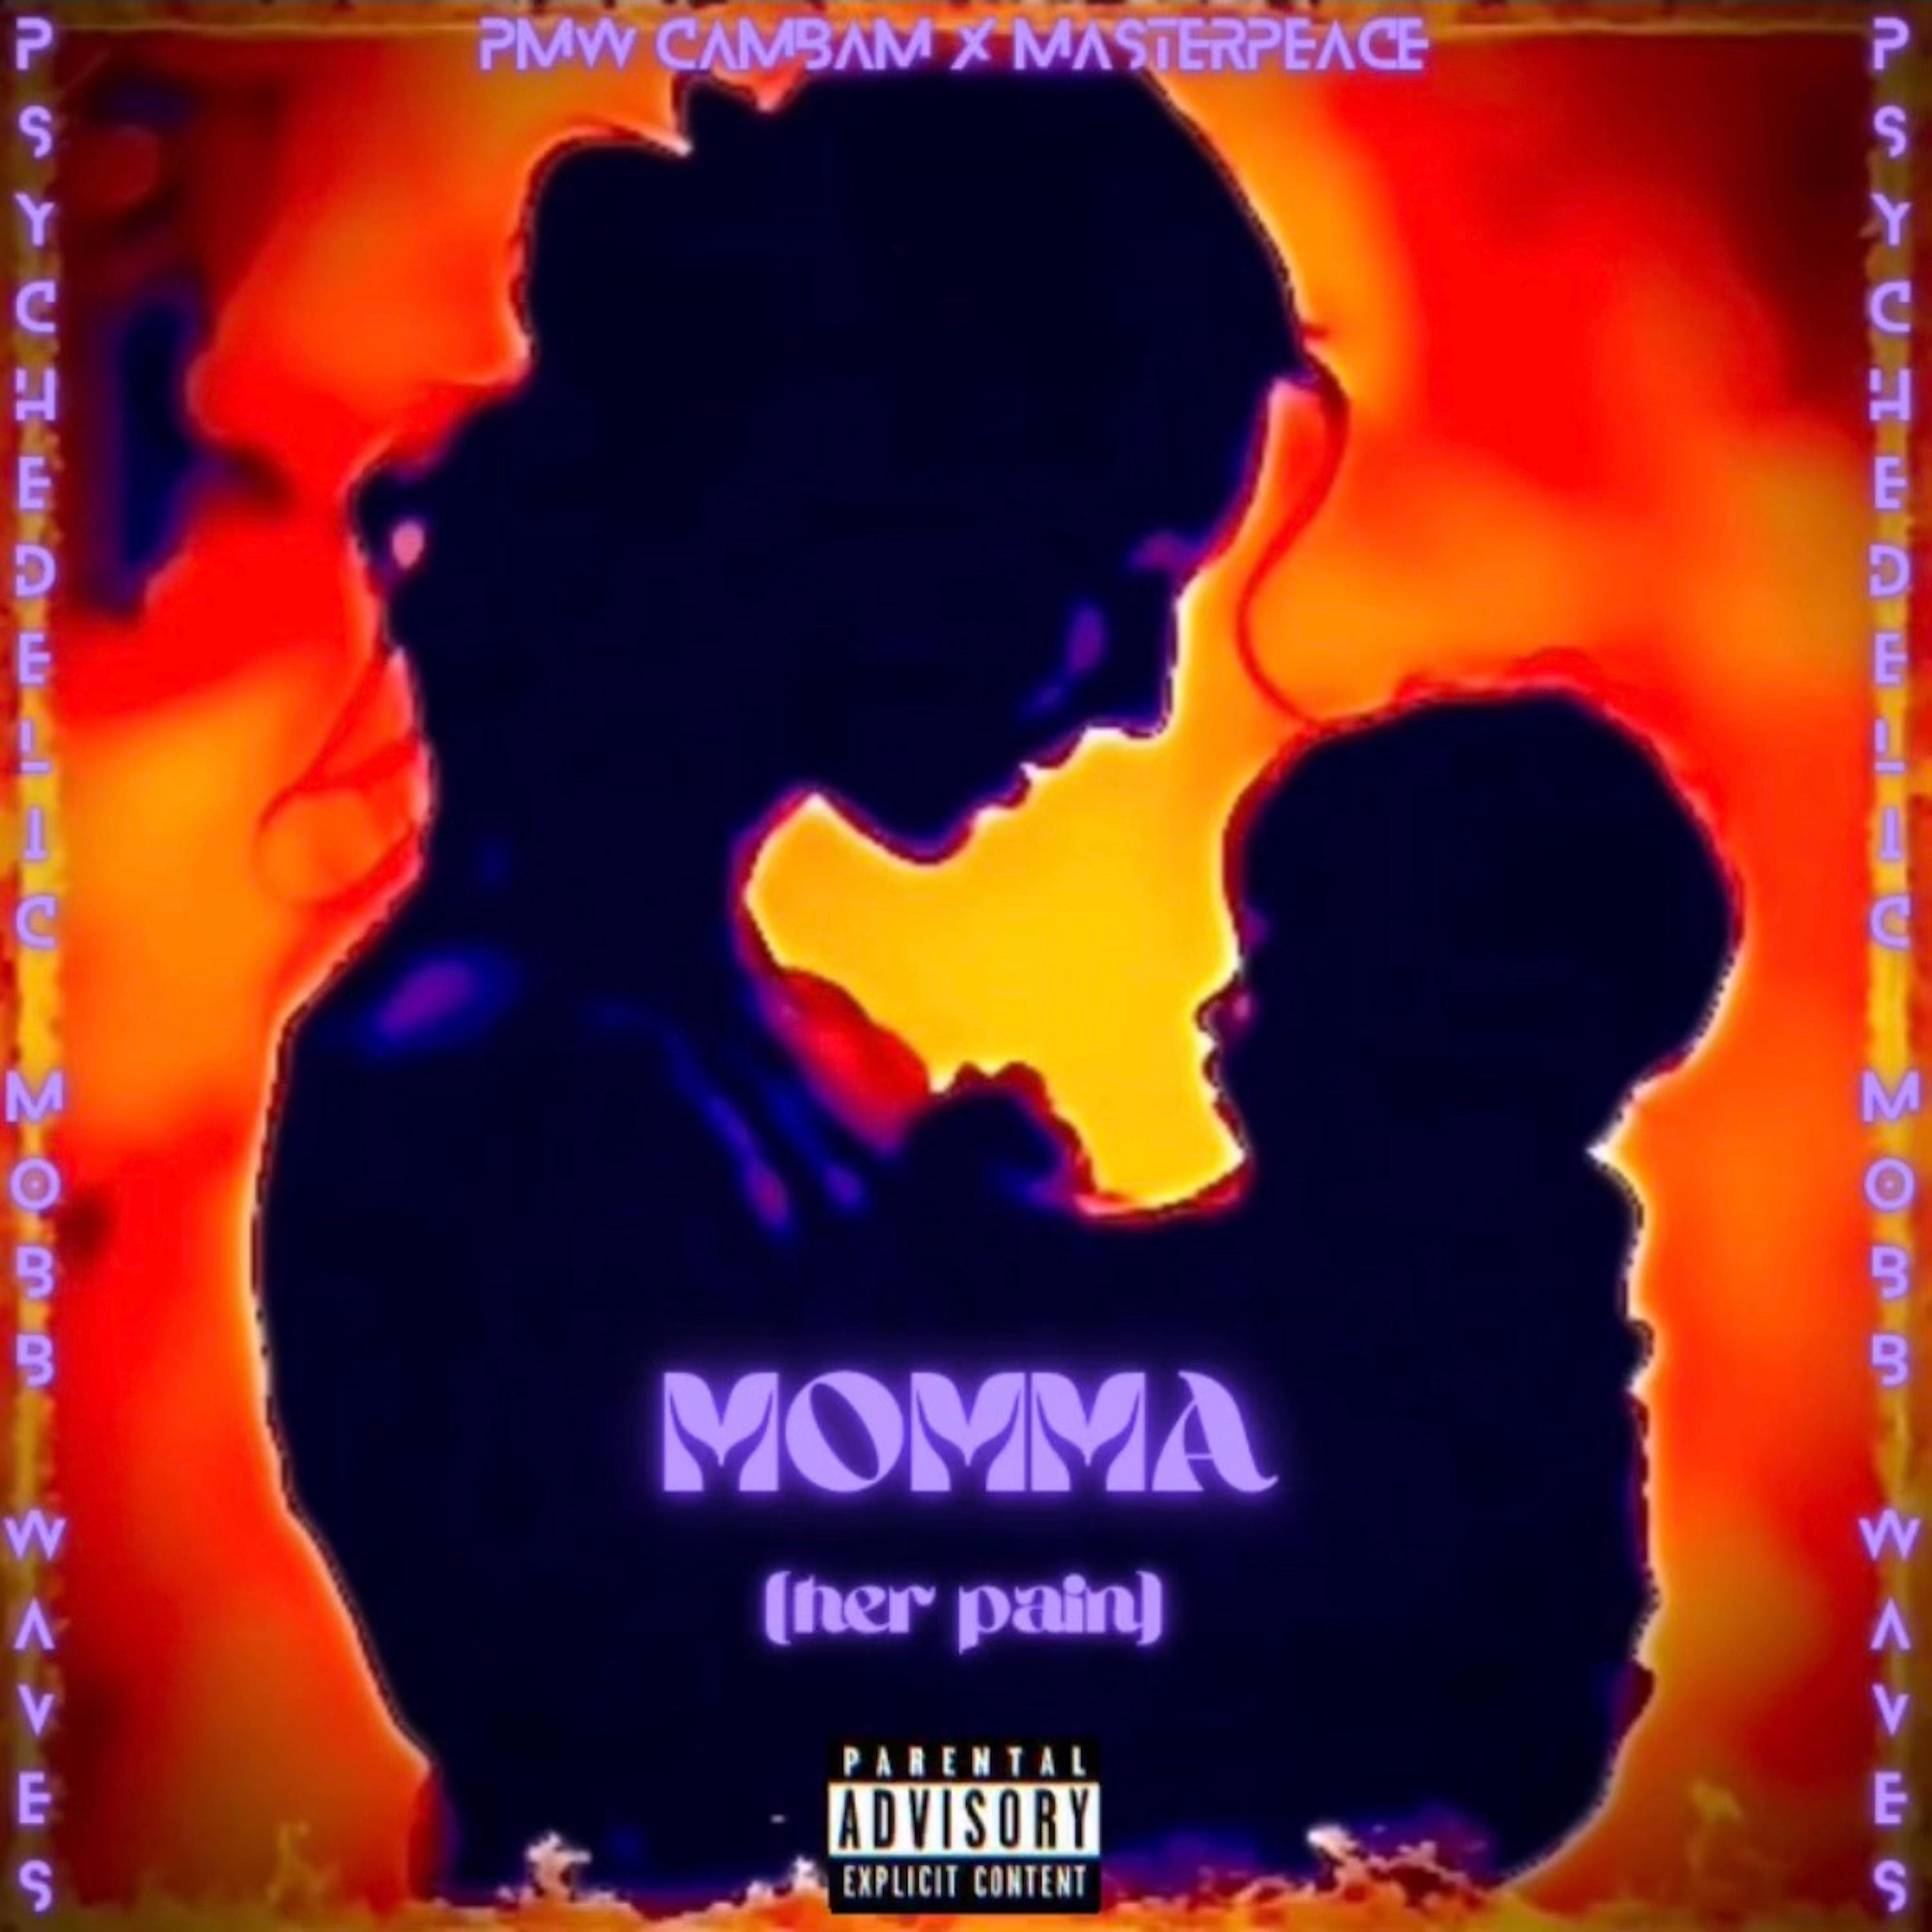 PMW - Momma (her pain)